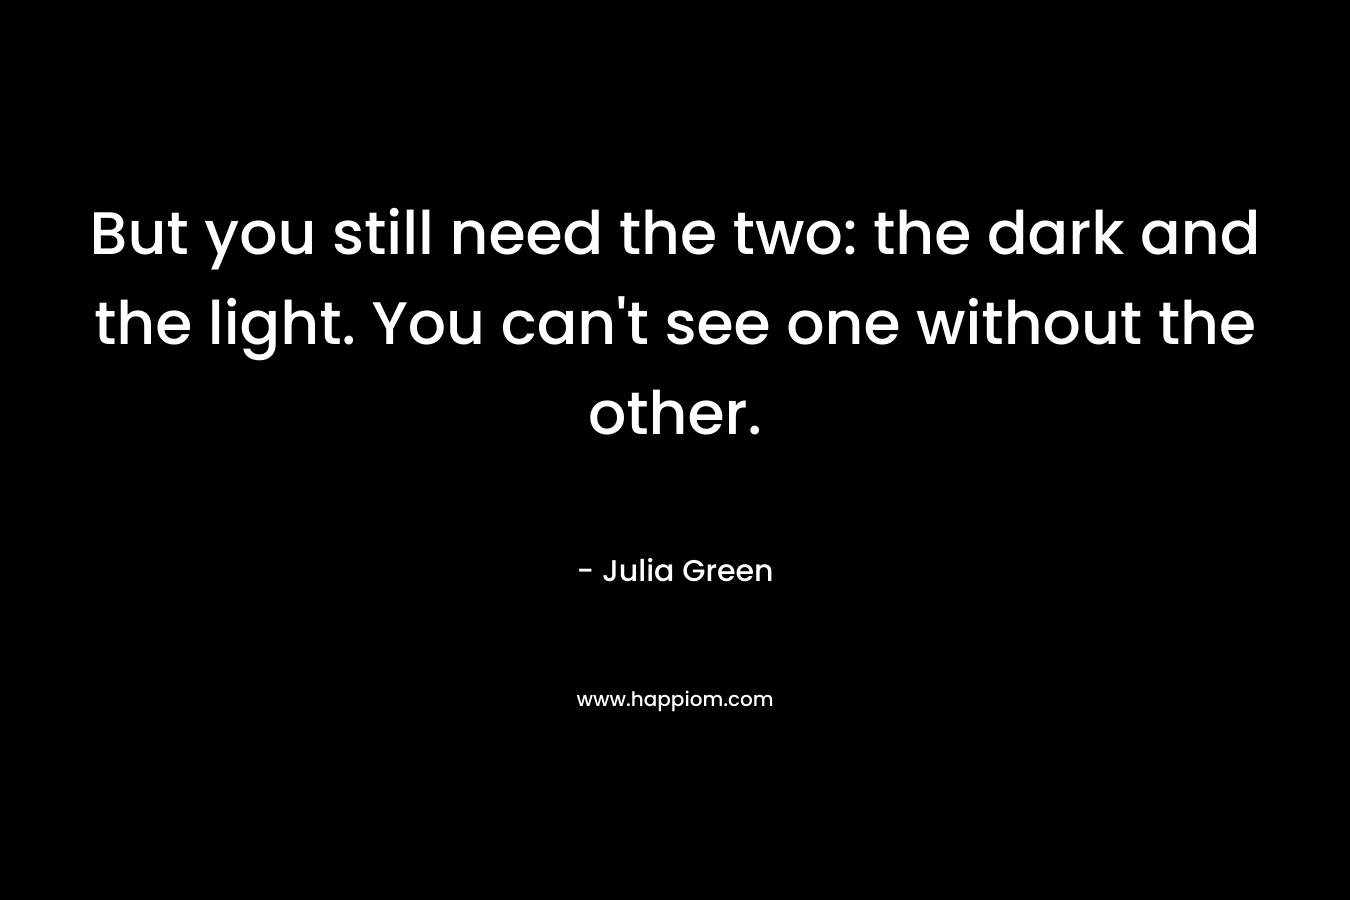 But you still need the two: the dark and the light. You can't see one without the other.